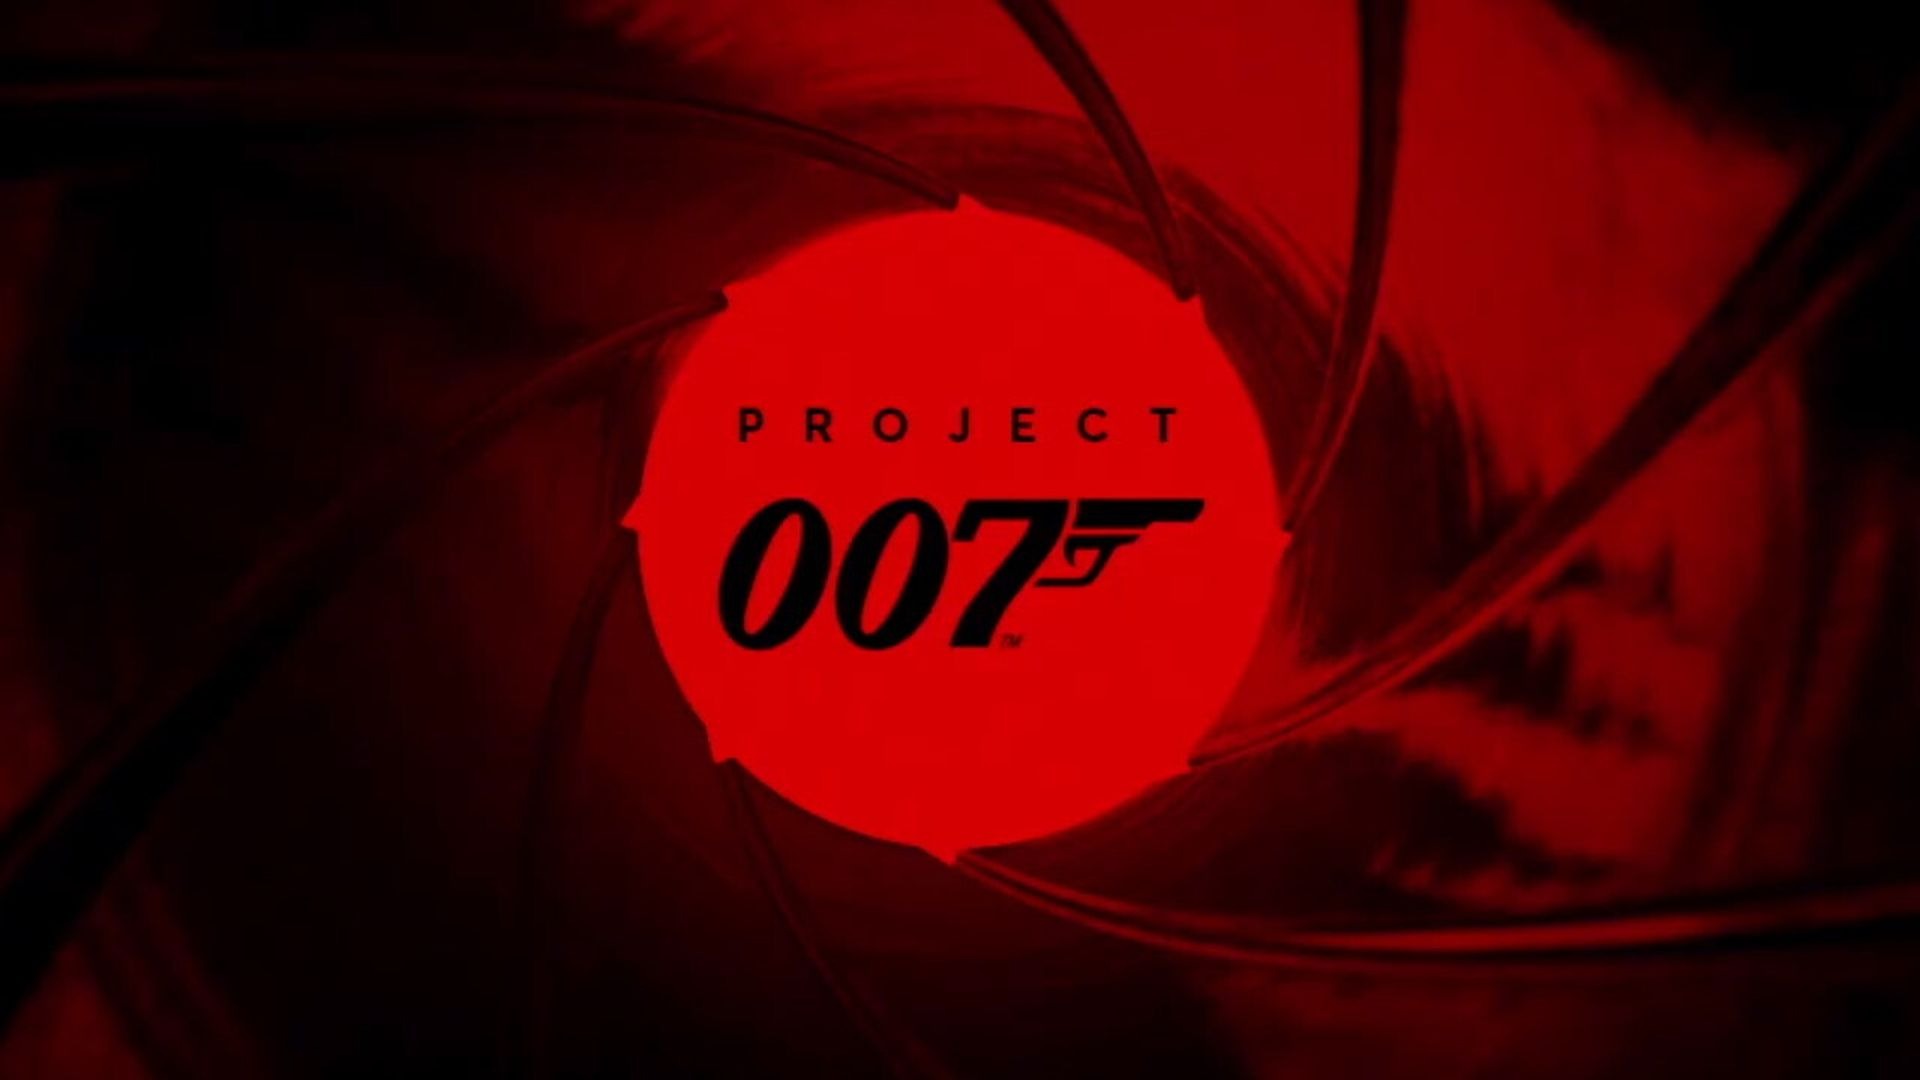 Project 007 teaser